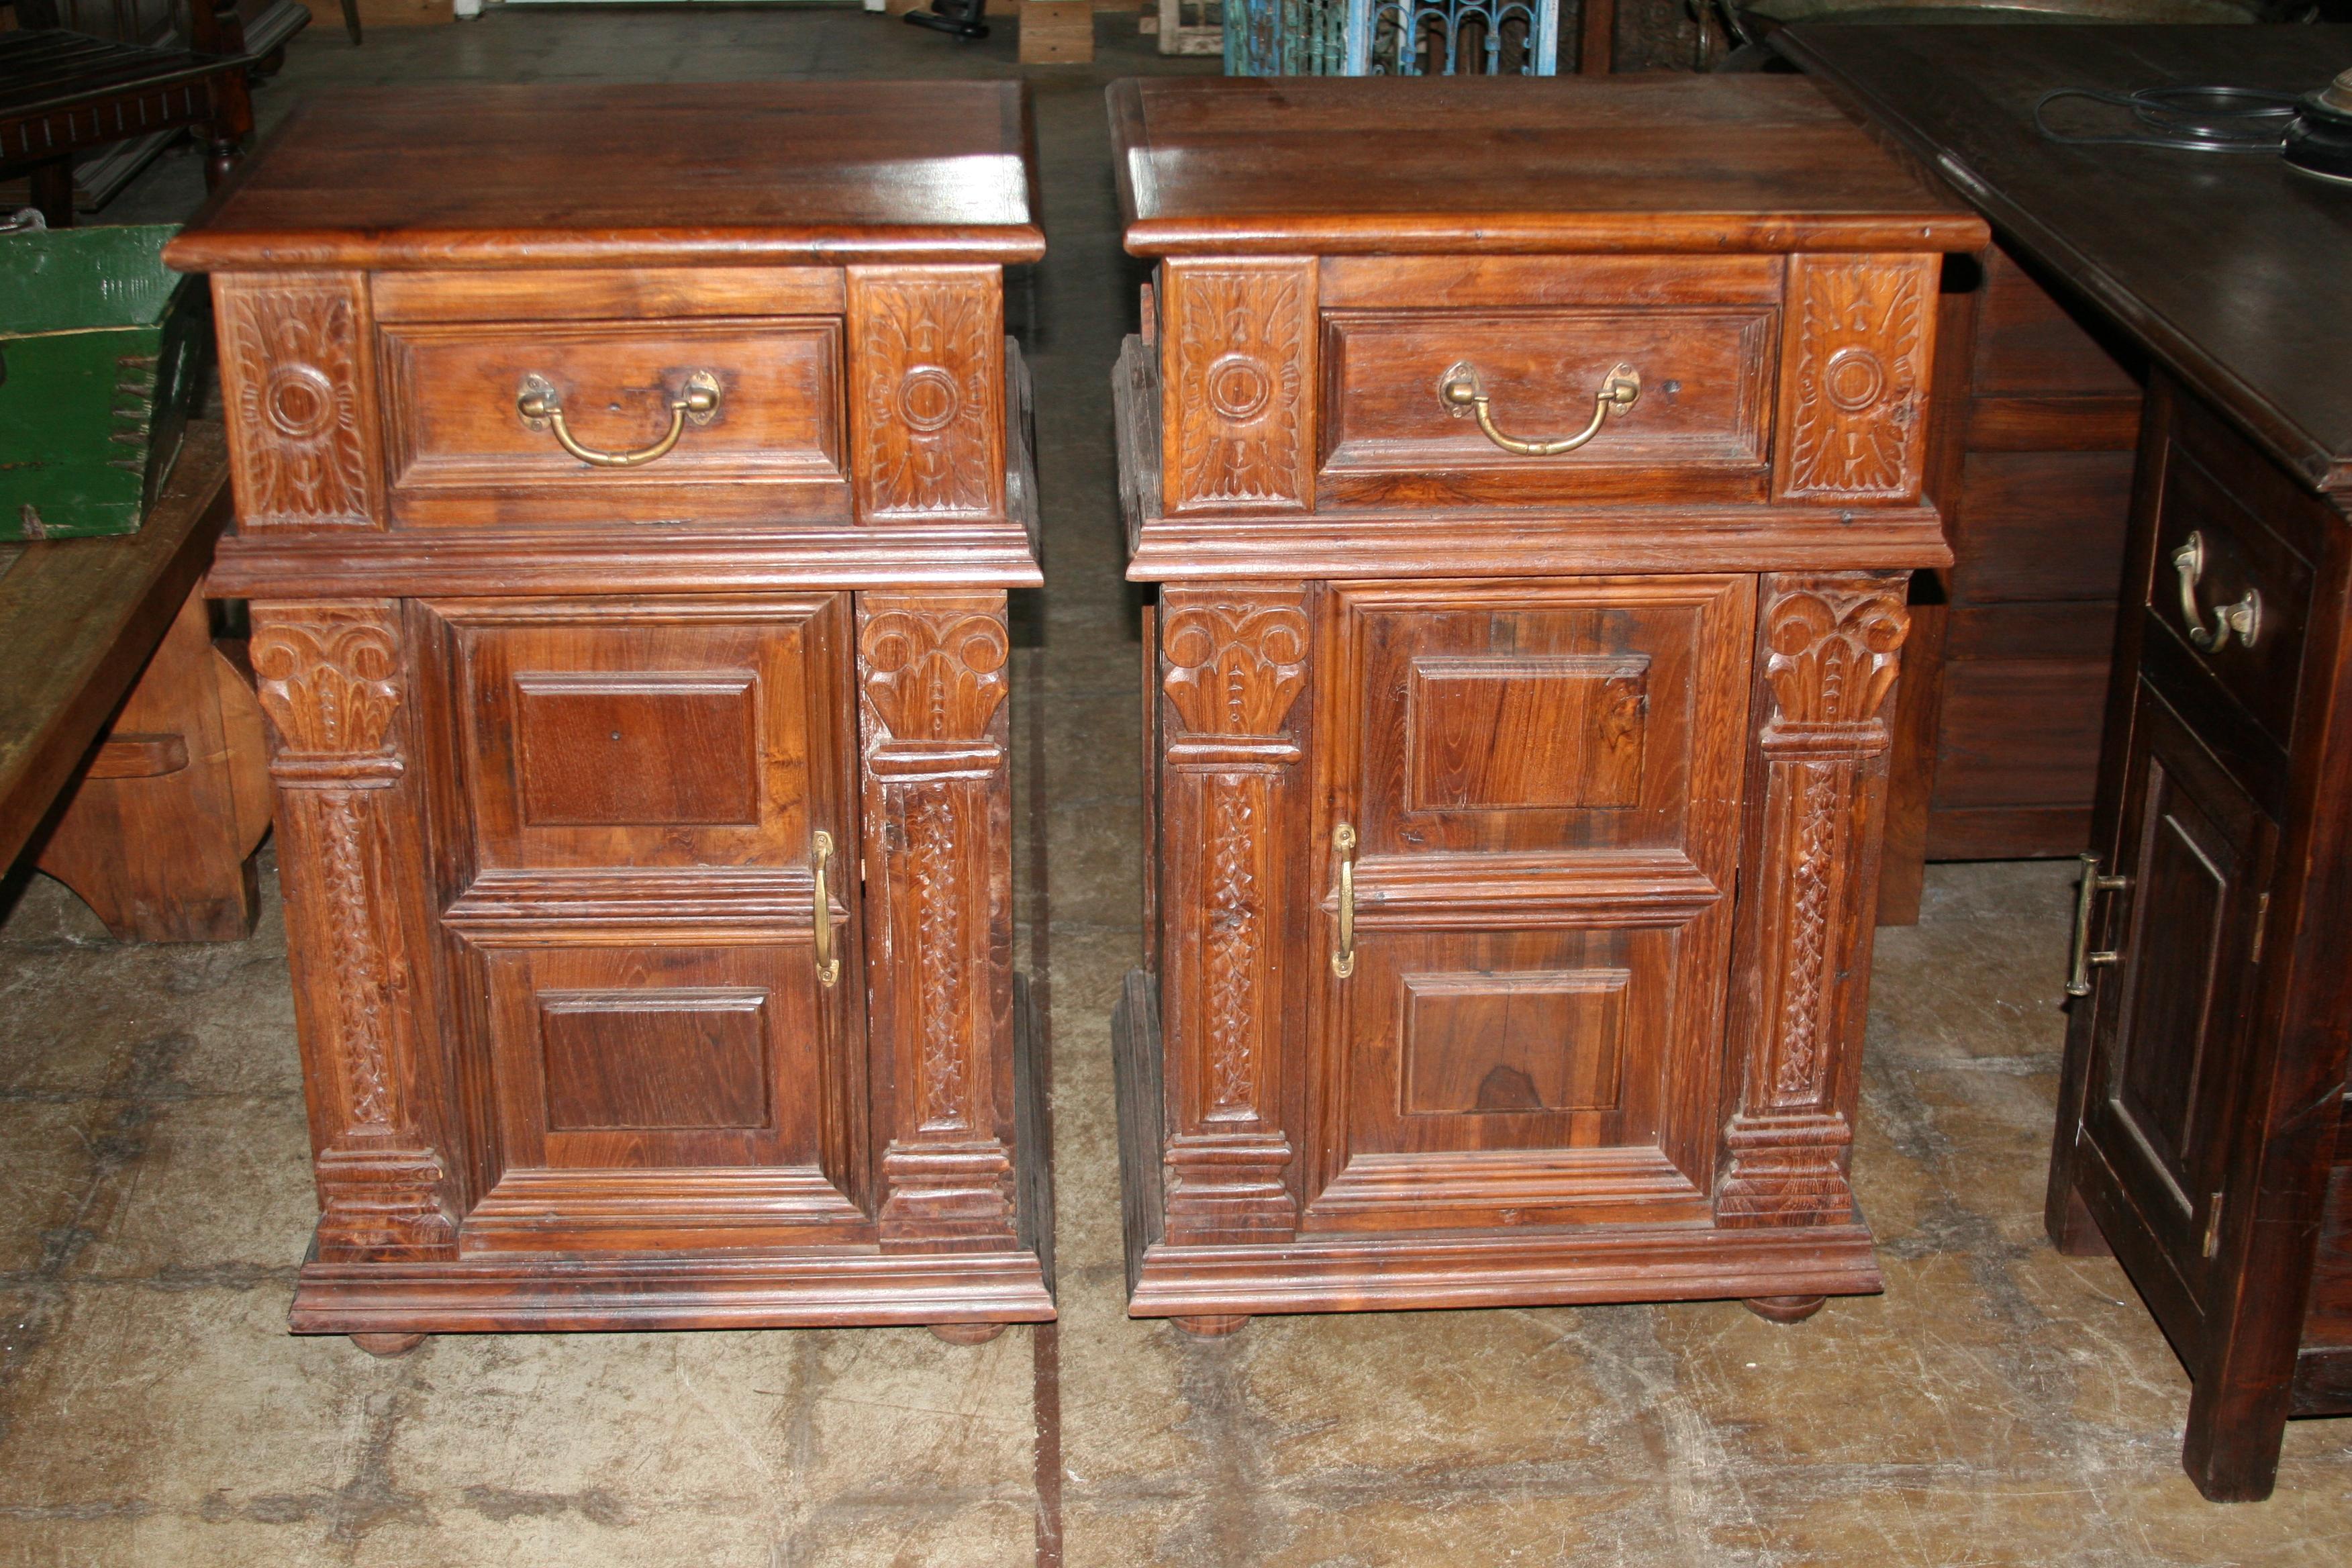 These night stands are so well crafted they can be called almost indestructible. These are Classic examples of colonial era carpentry. Sturdily built with an upper drawer and a single large shelf at the bottom with a double paneled door. Retrained